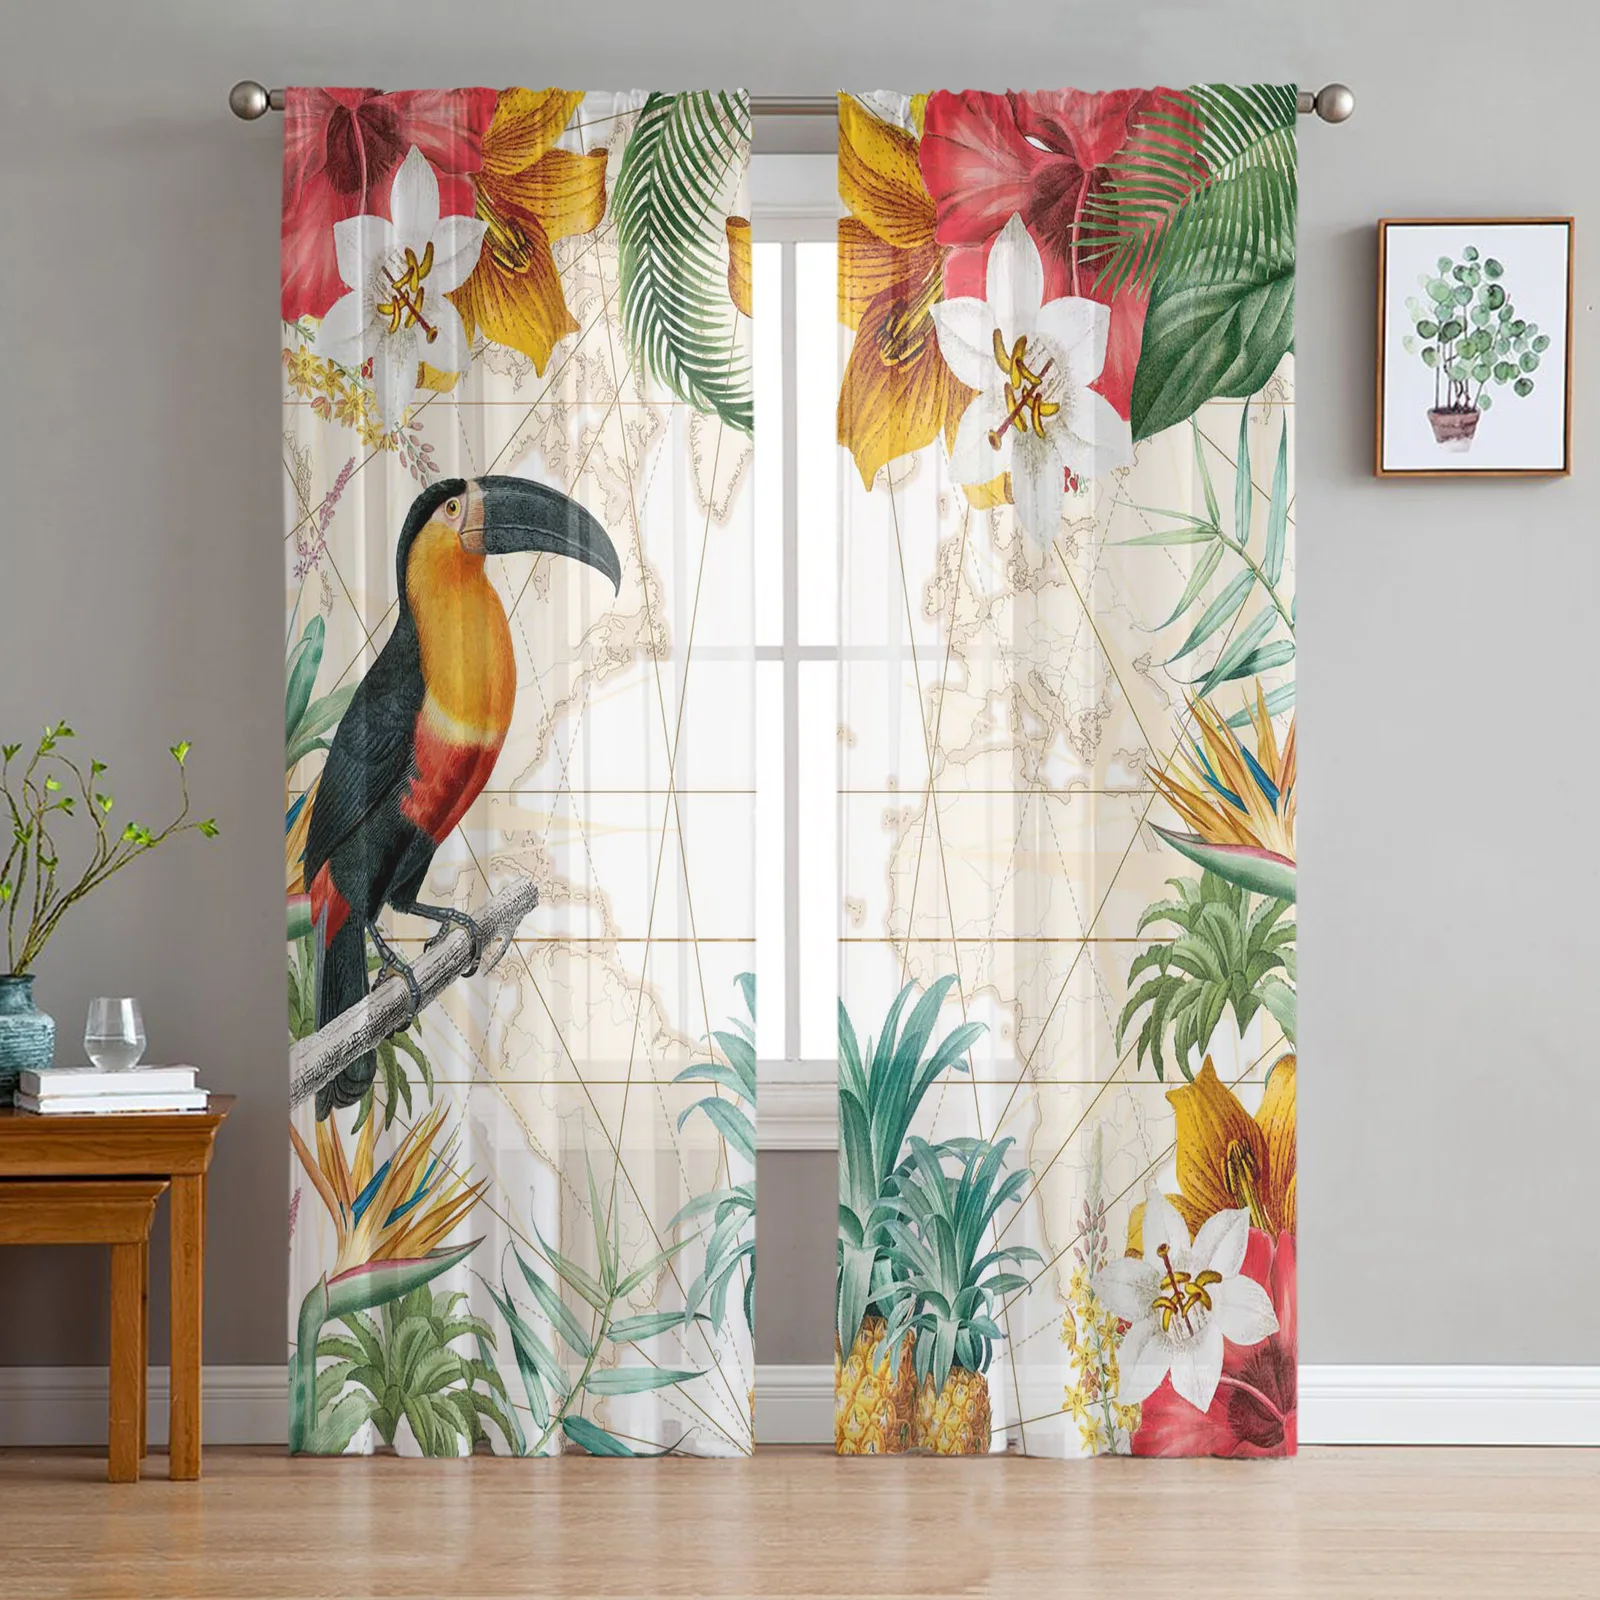 

Toucan Flower Fruit Tropical Plants Pineapple Map Tulle Sheer Window Curtains for Living Room Bedroom Tulle Voile Curtains Decor